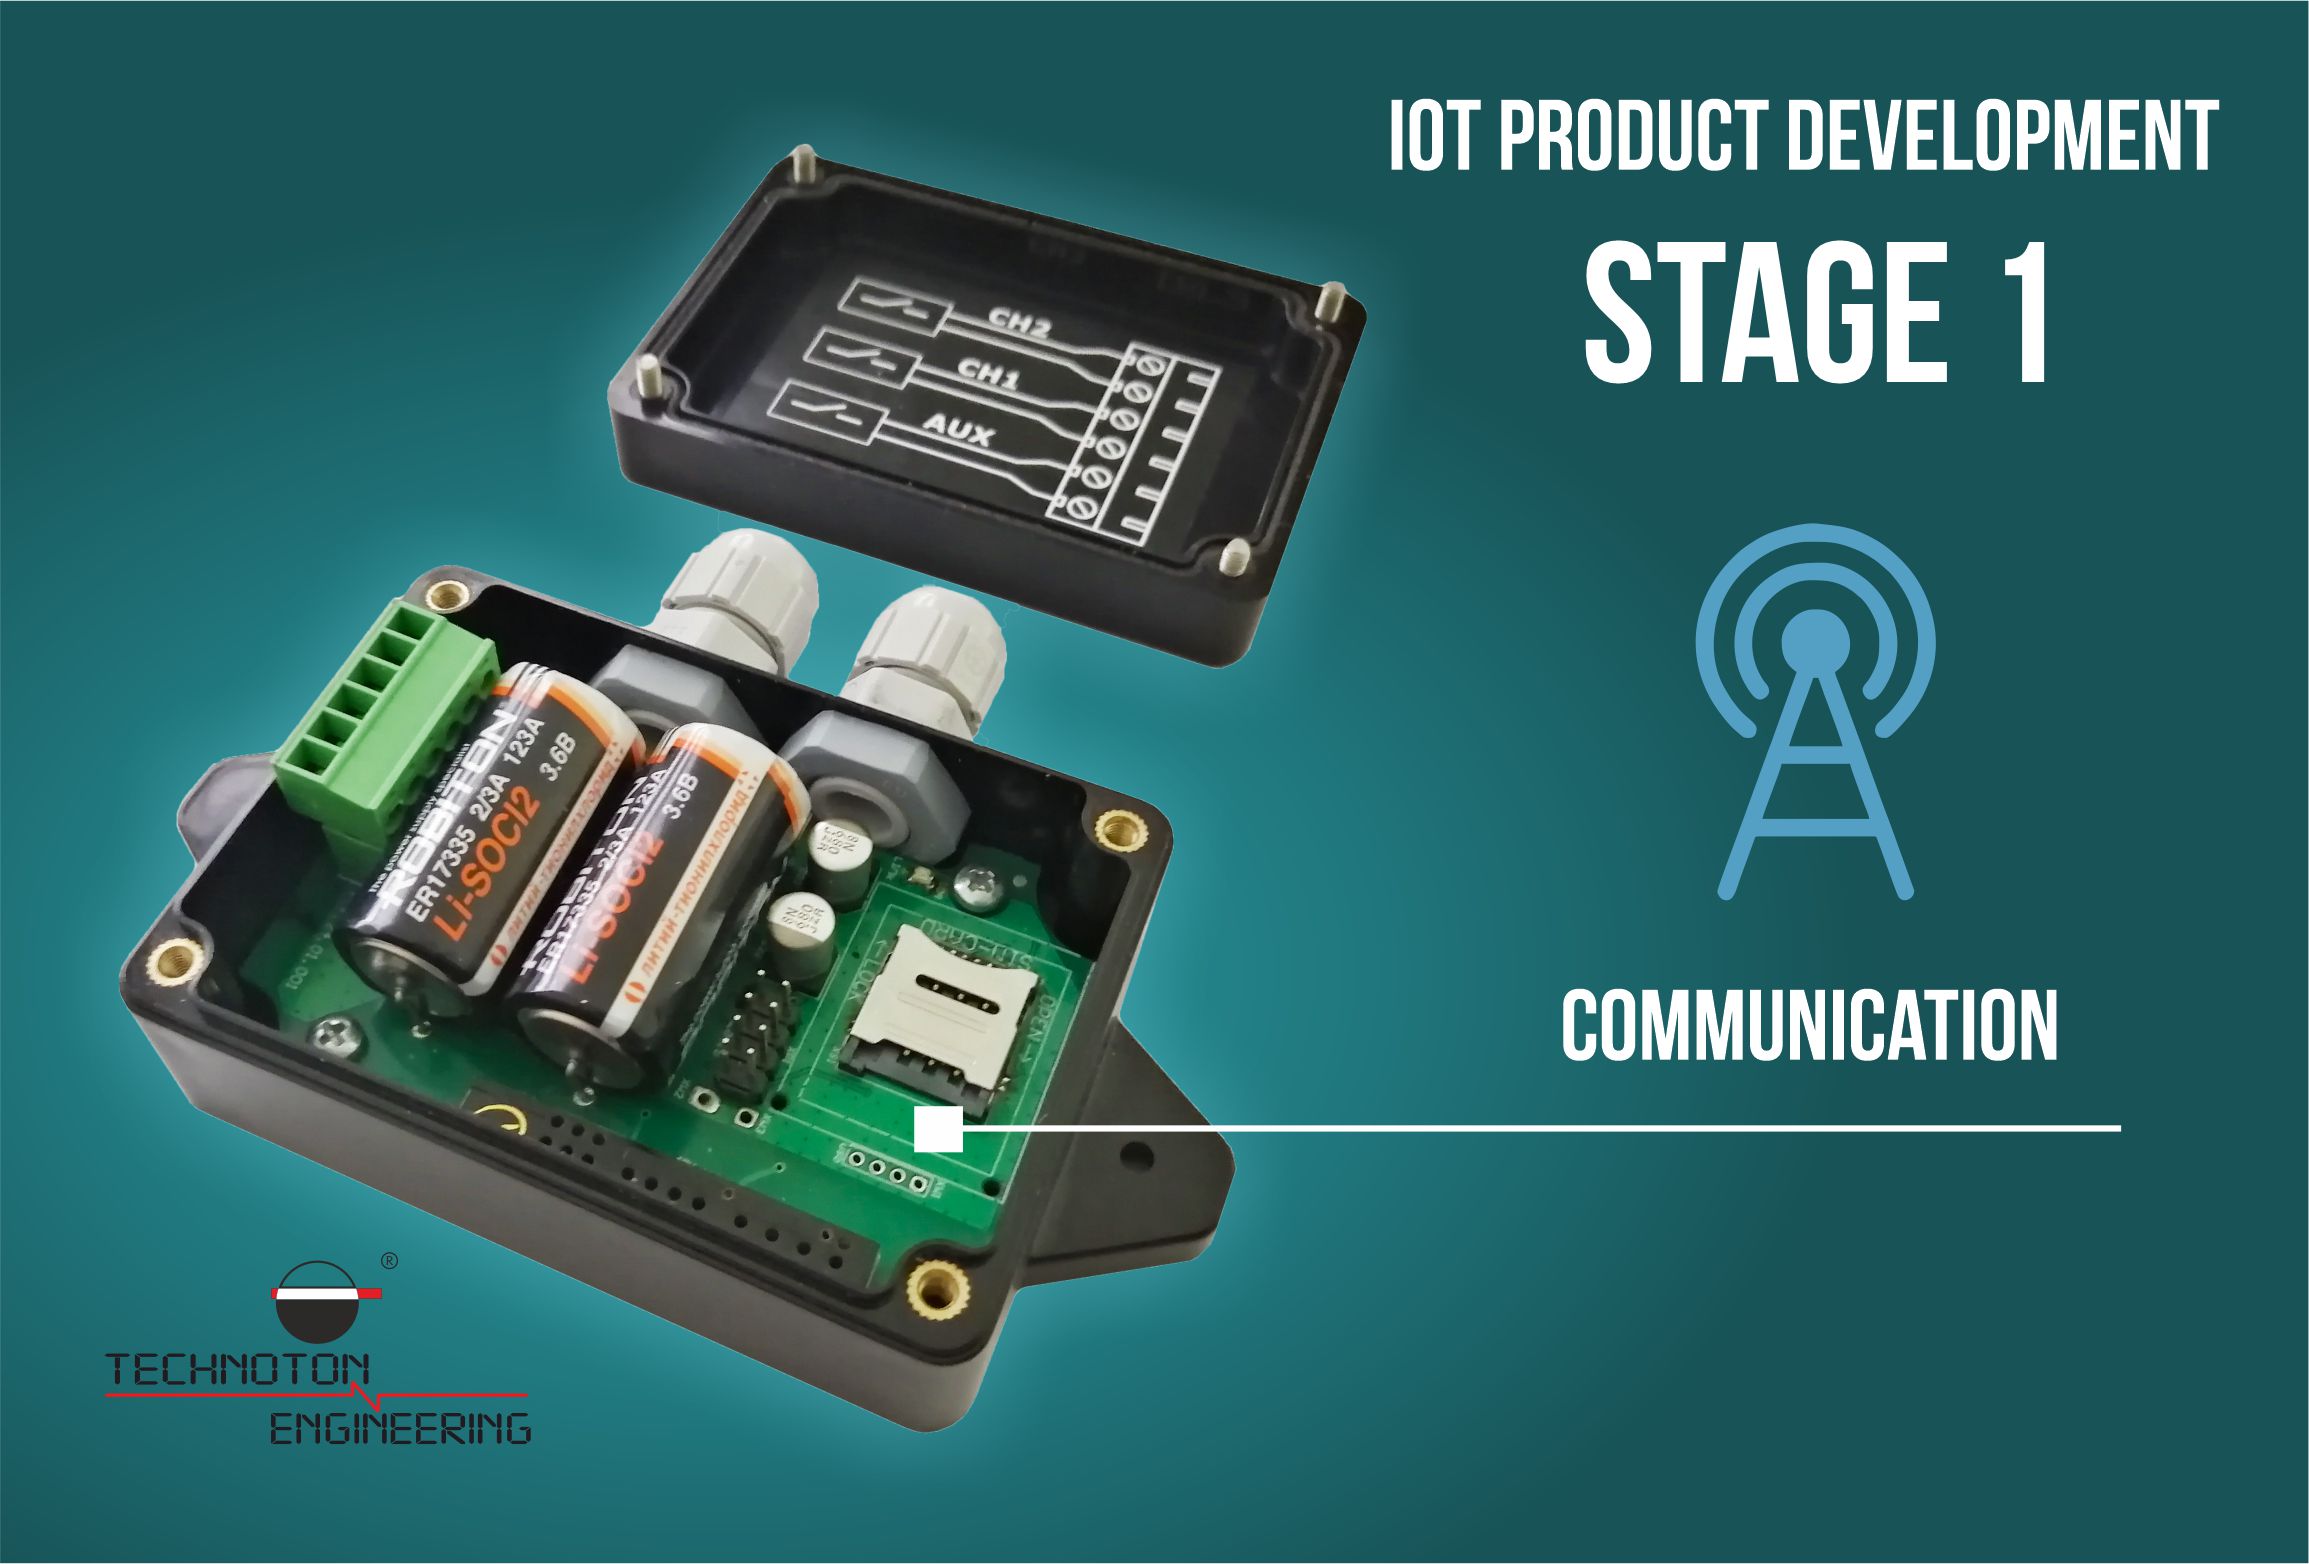 Communication stage for IoT product development